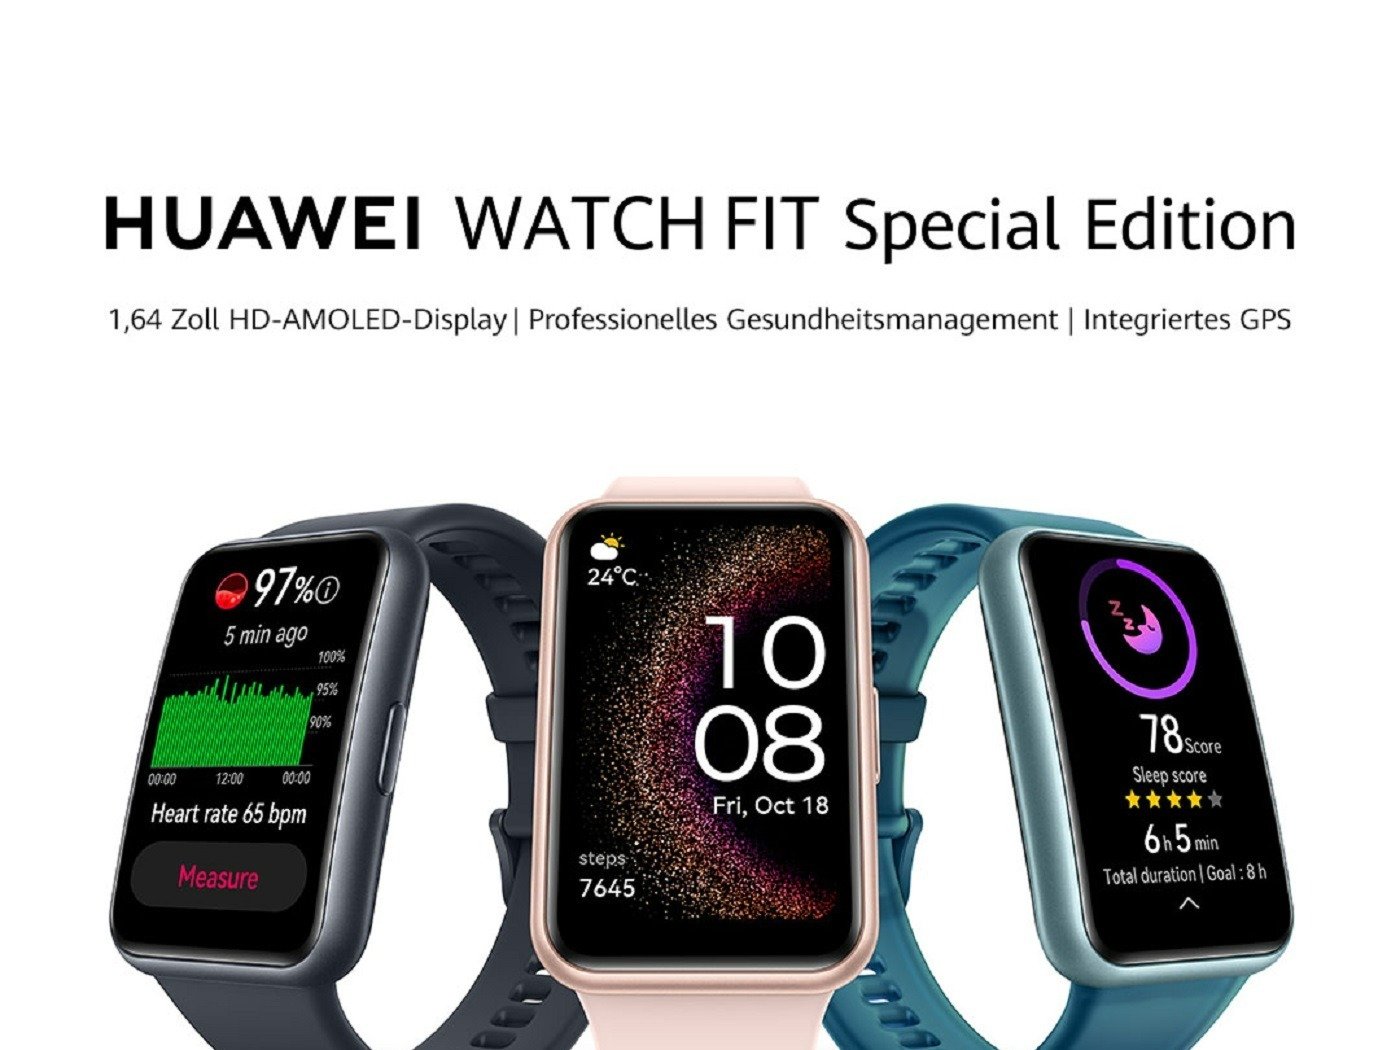 Huawei Watch Fit Special Edition arrives in Europe

